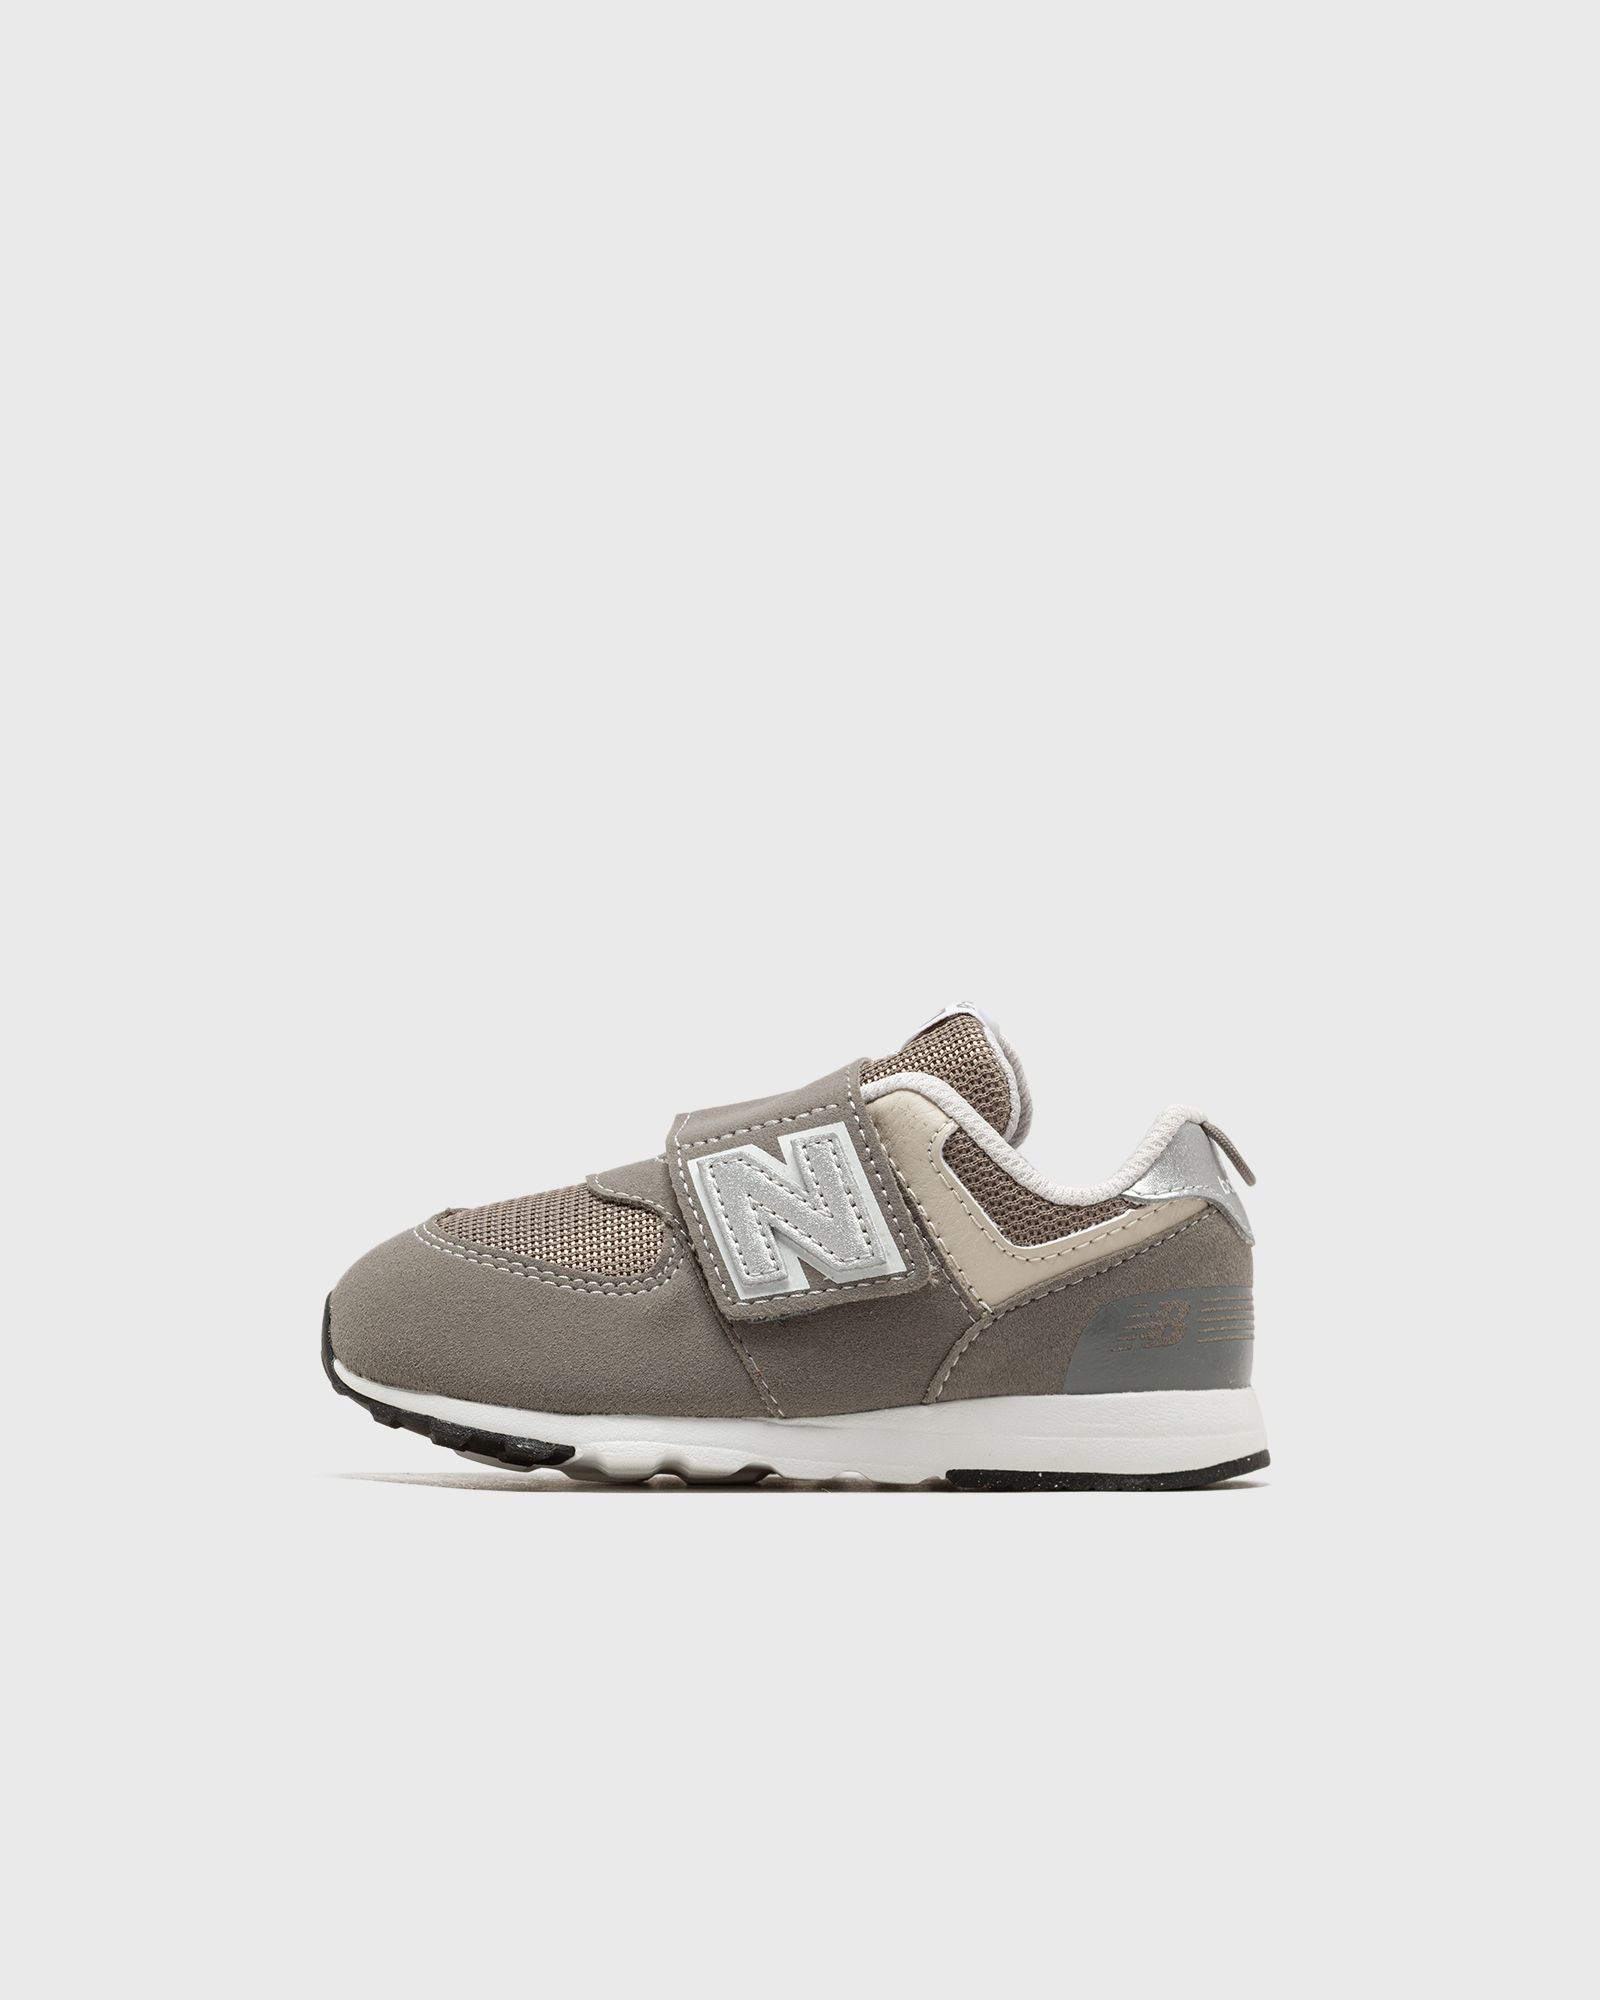 New Balance - nw574v1  sneakers grey in größe:22,5